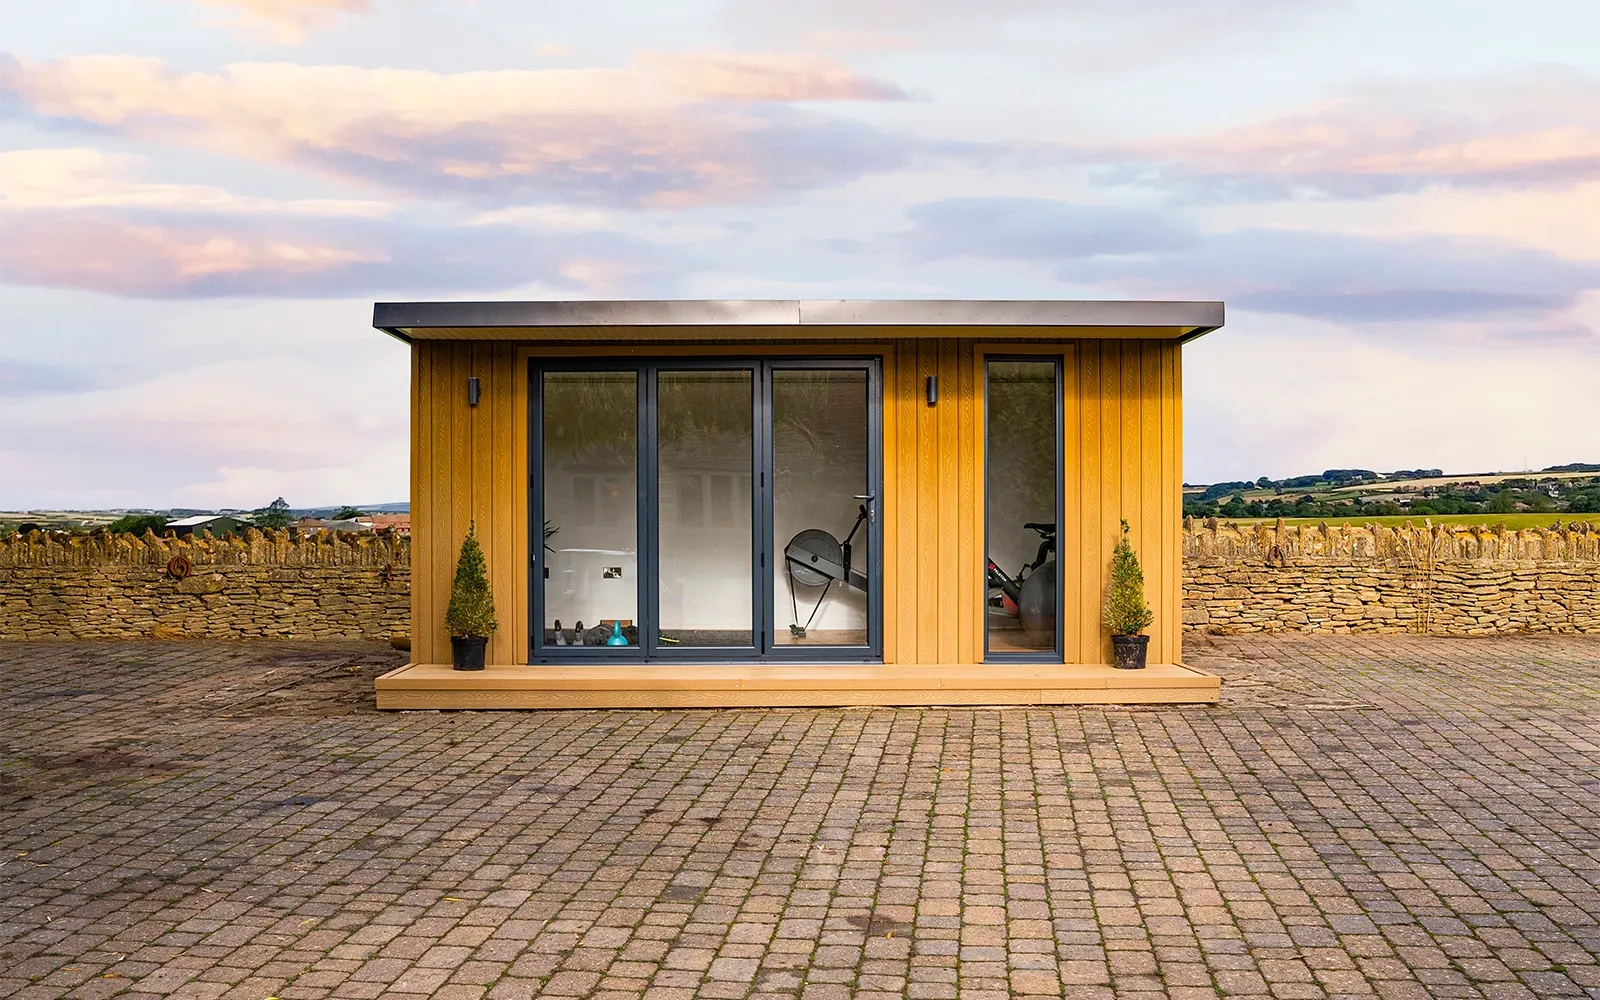 A garden room front on with a paved courtyard and a faint sunset in the background